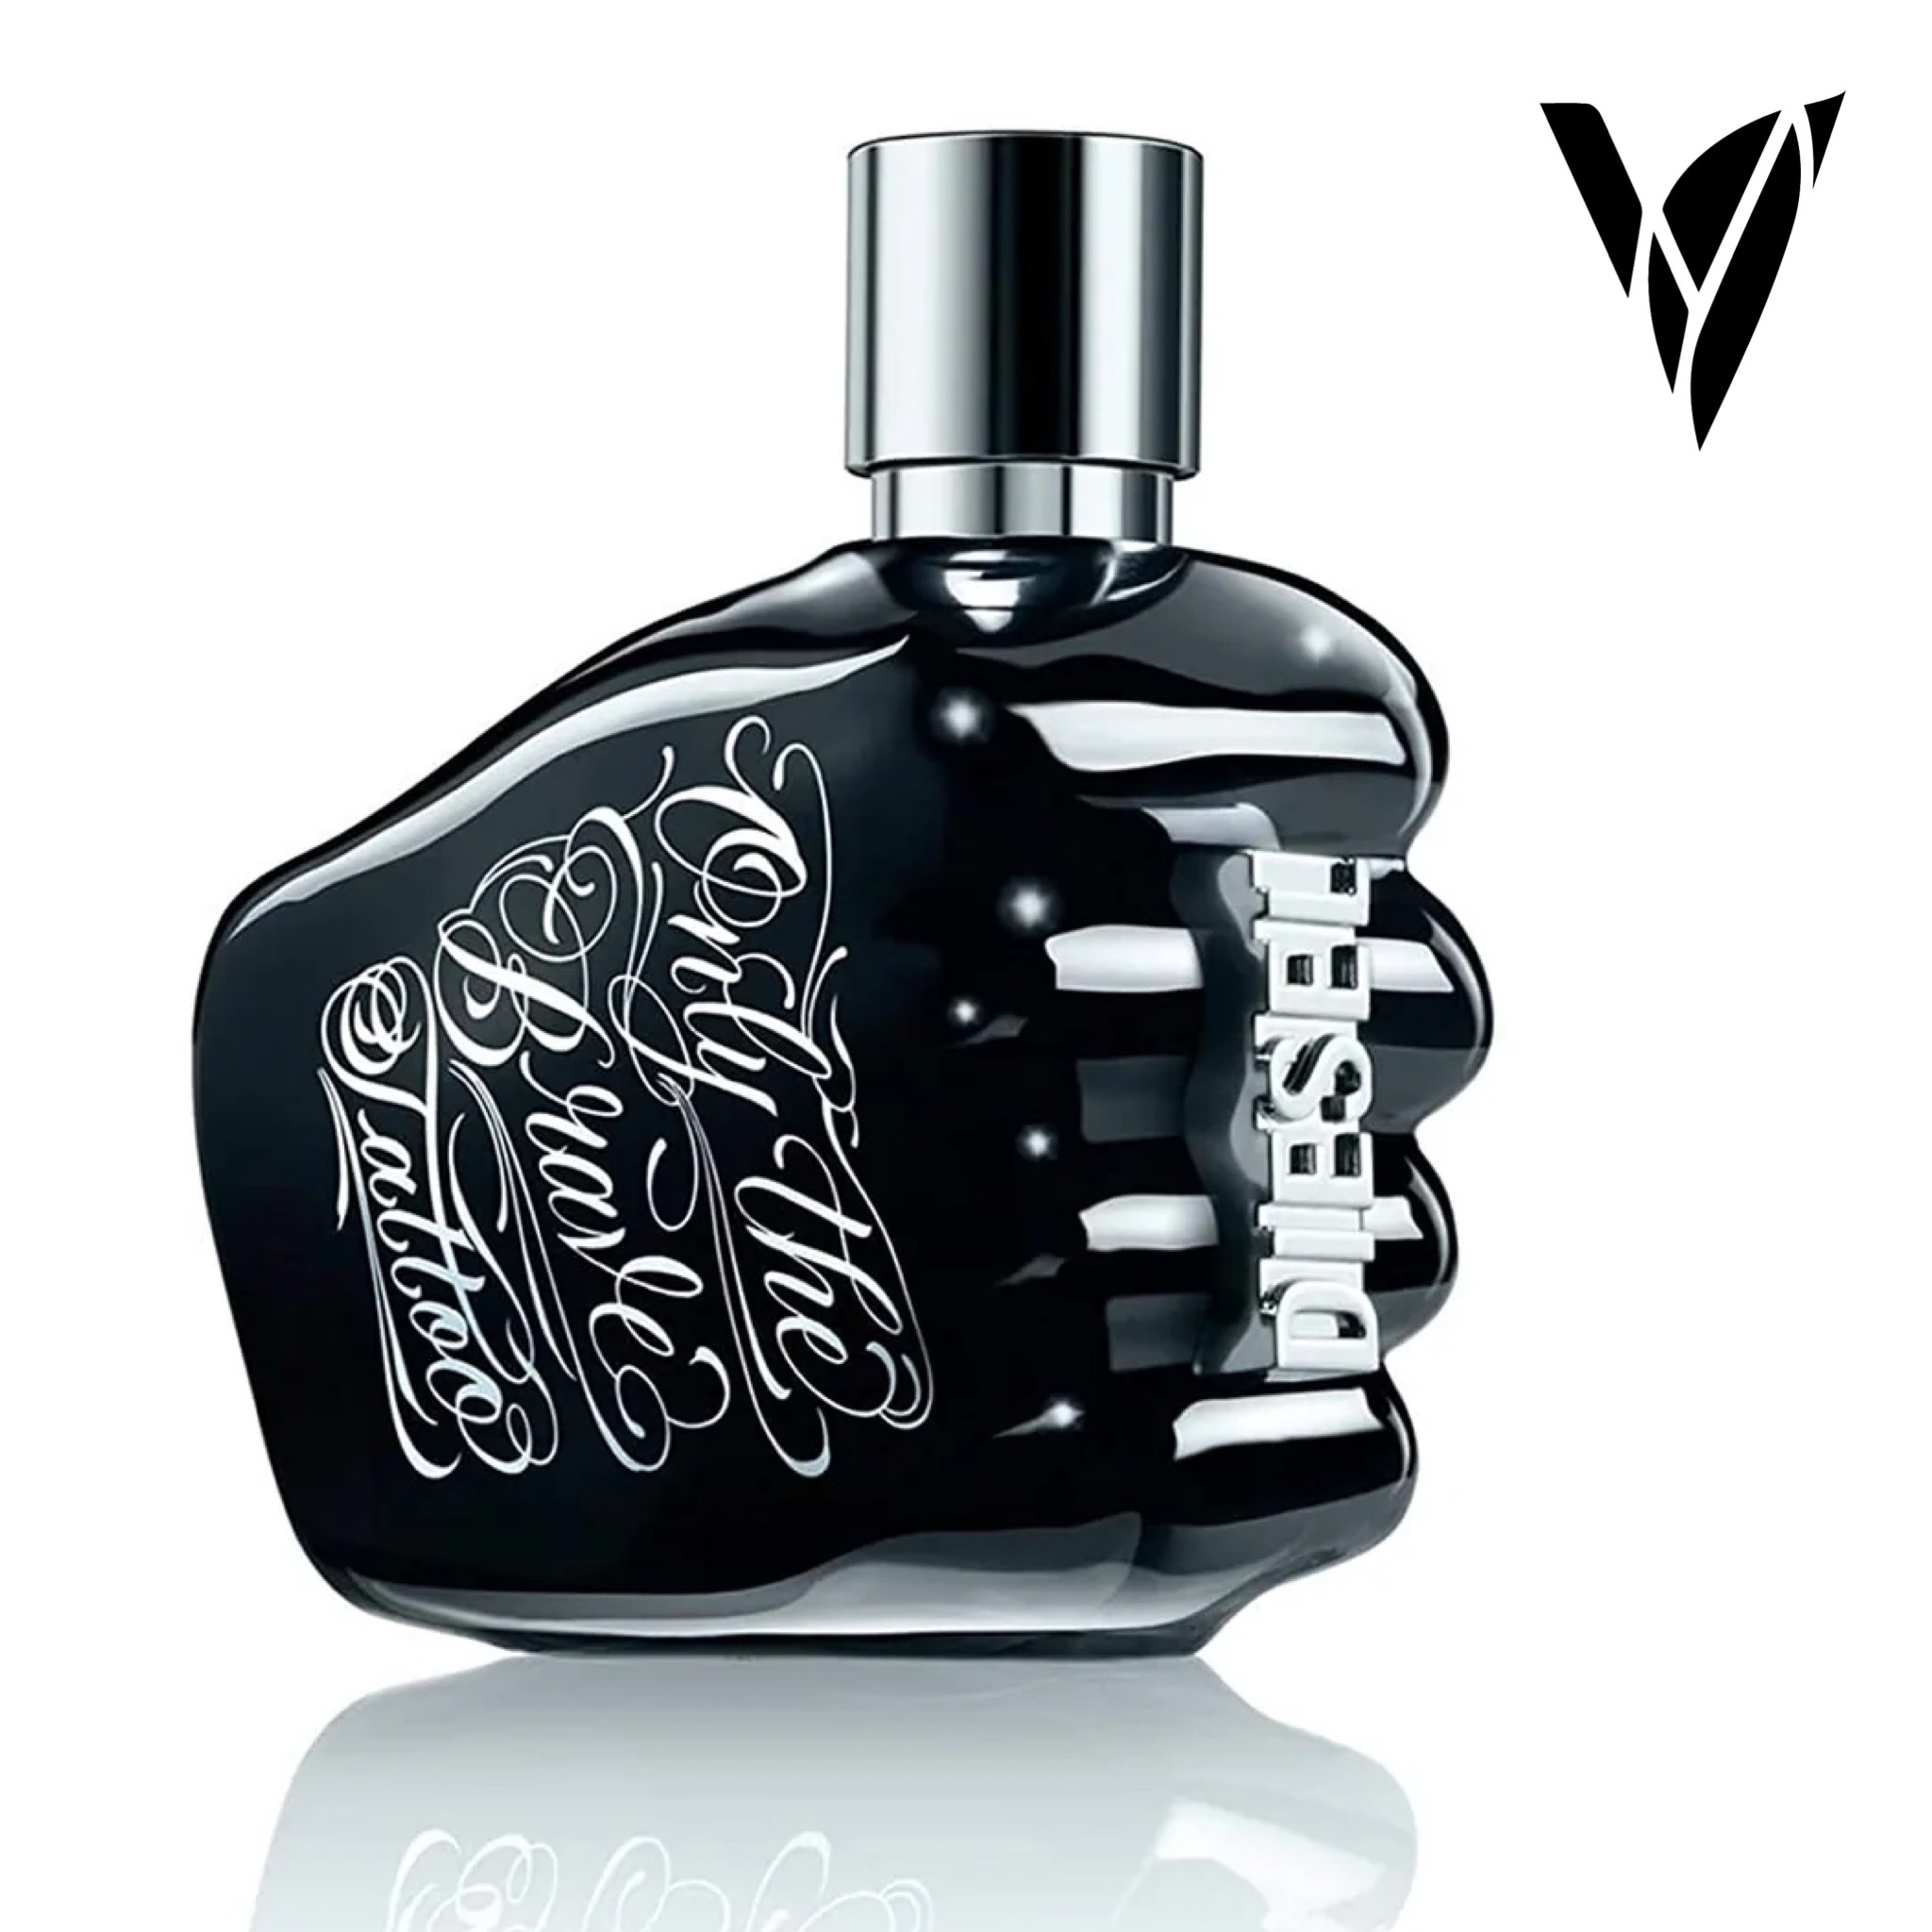 Only The Brave Tattoo Diesel 1.1 + Decant